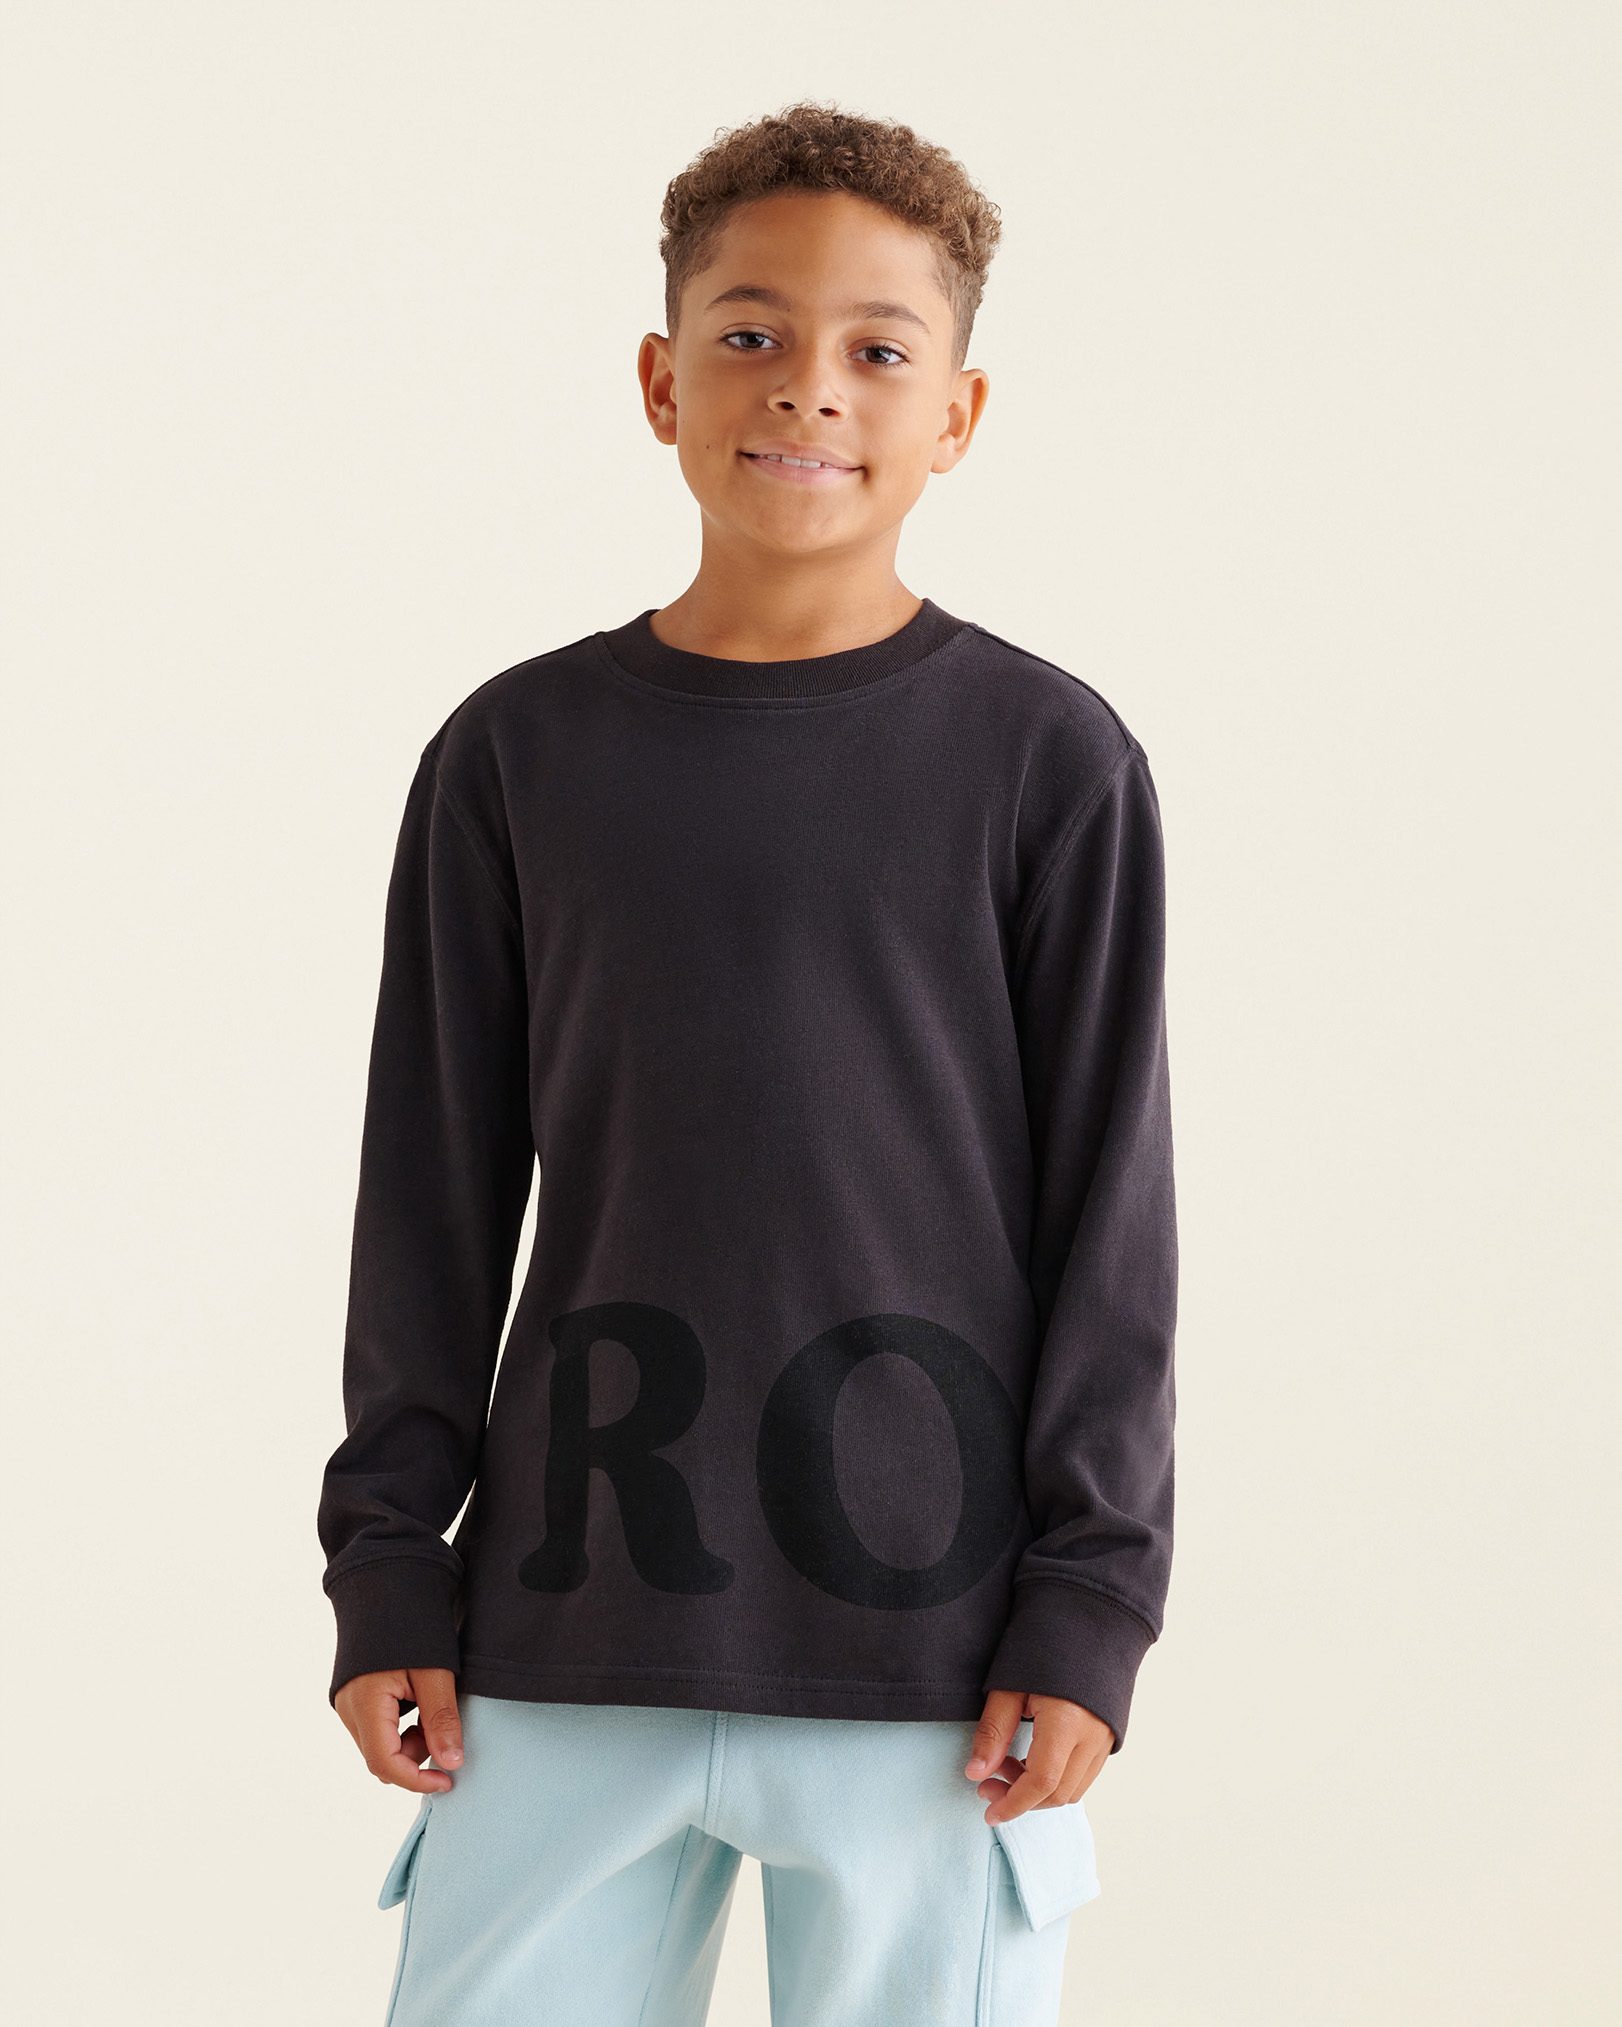 Roots Kids One Long Sleeve T-Shirt in Black